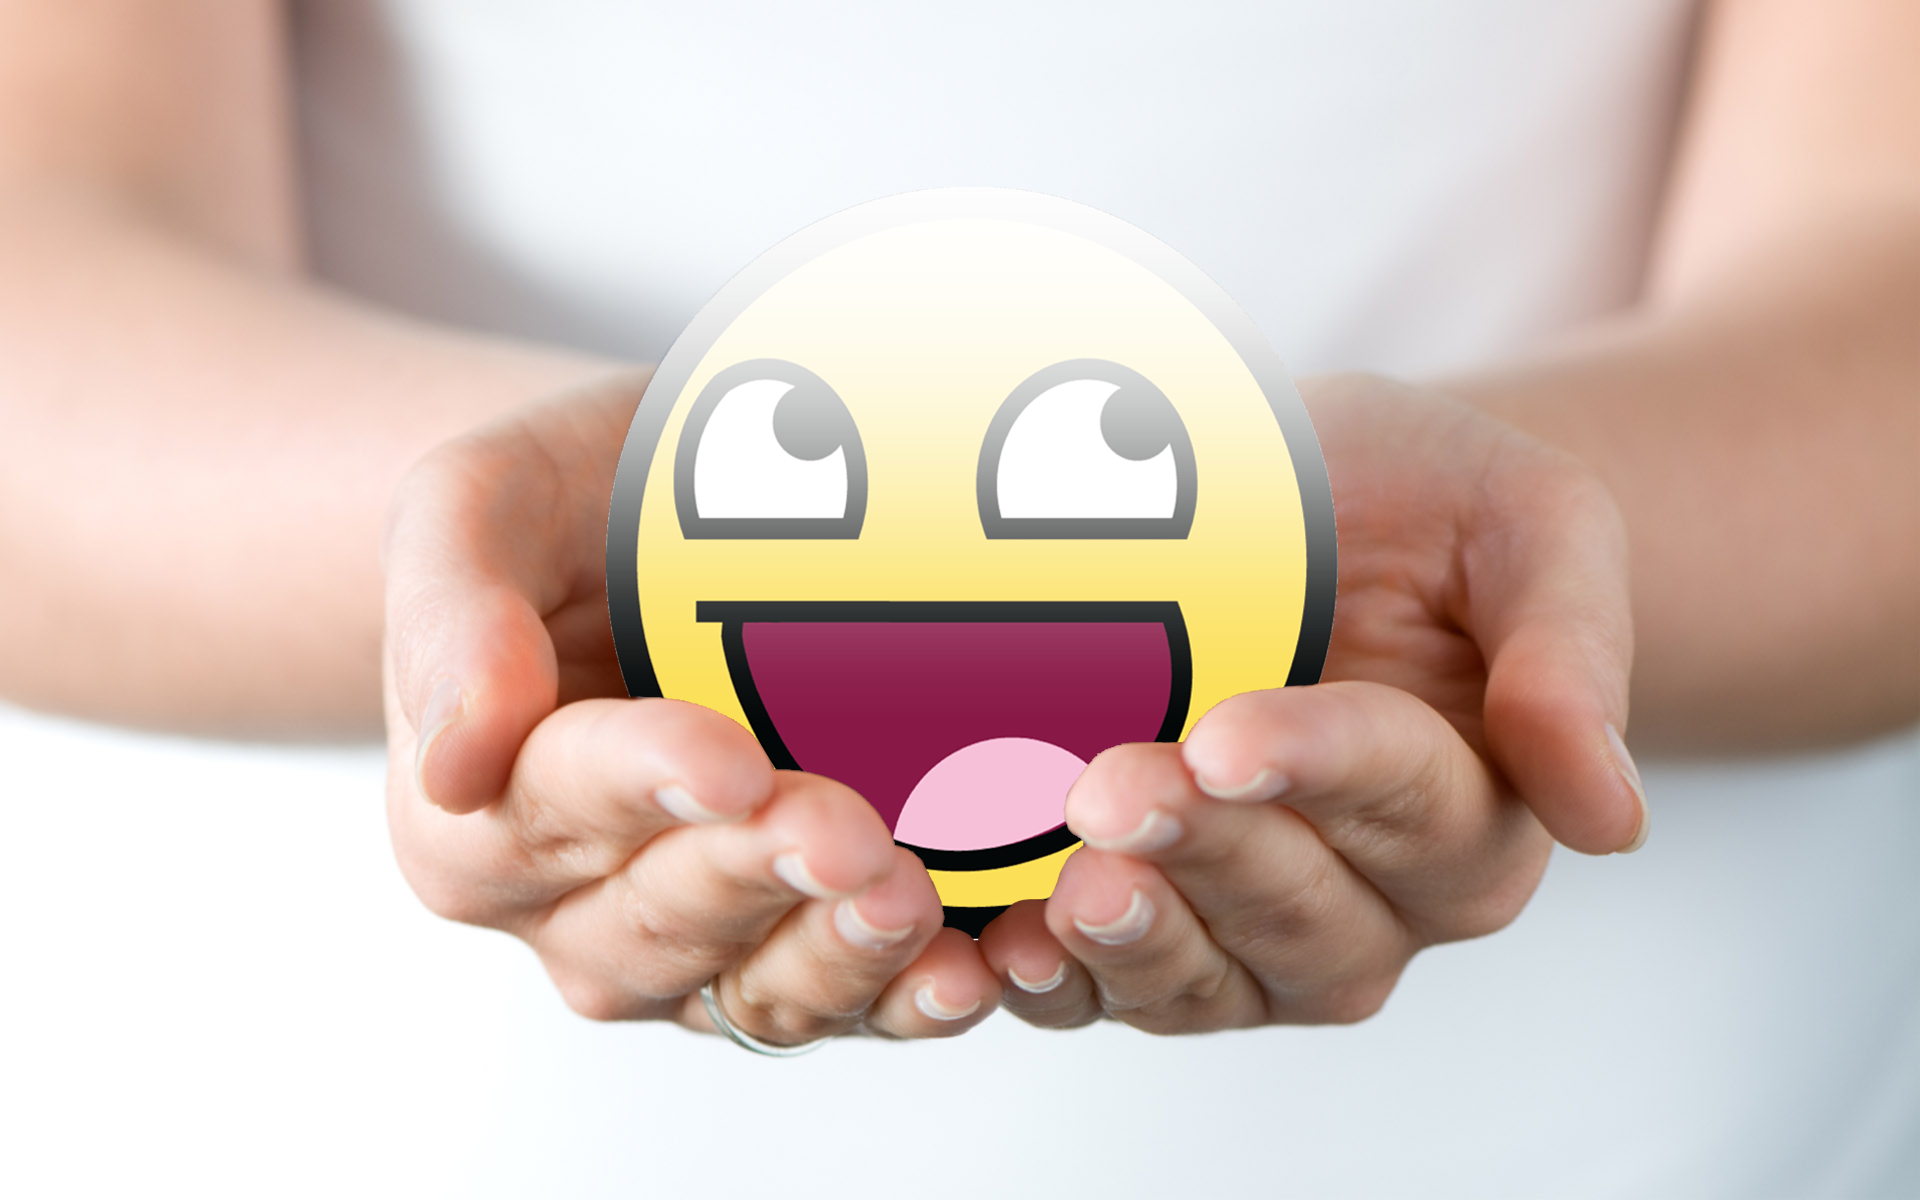 Wallpaper Awesome Smiley Face X Kb Jpeg HD